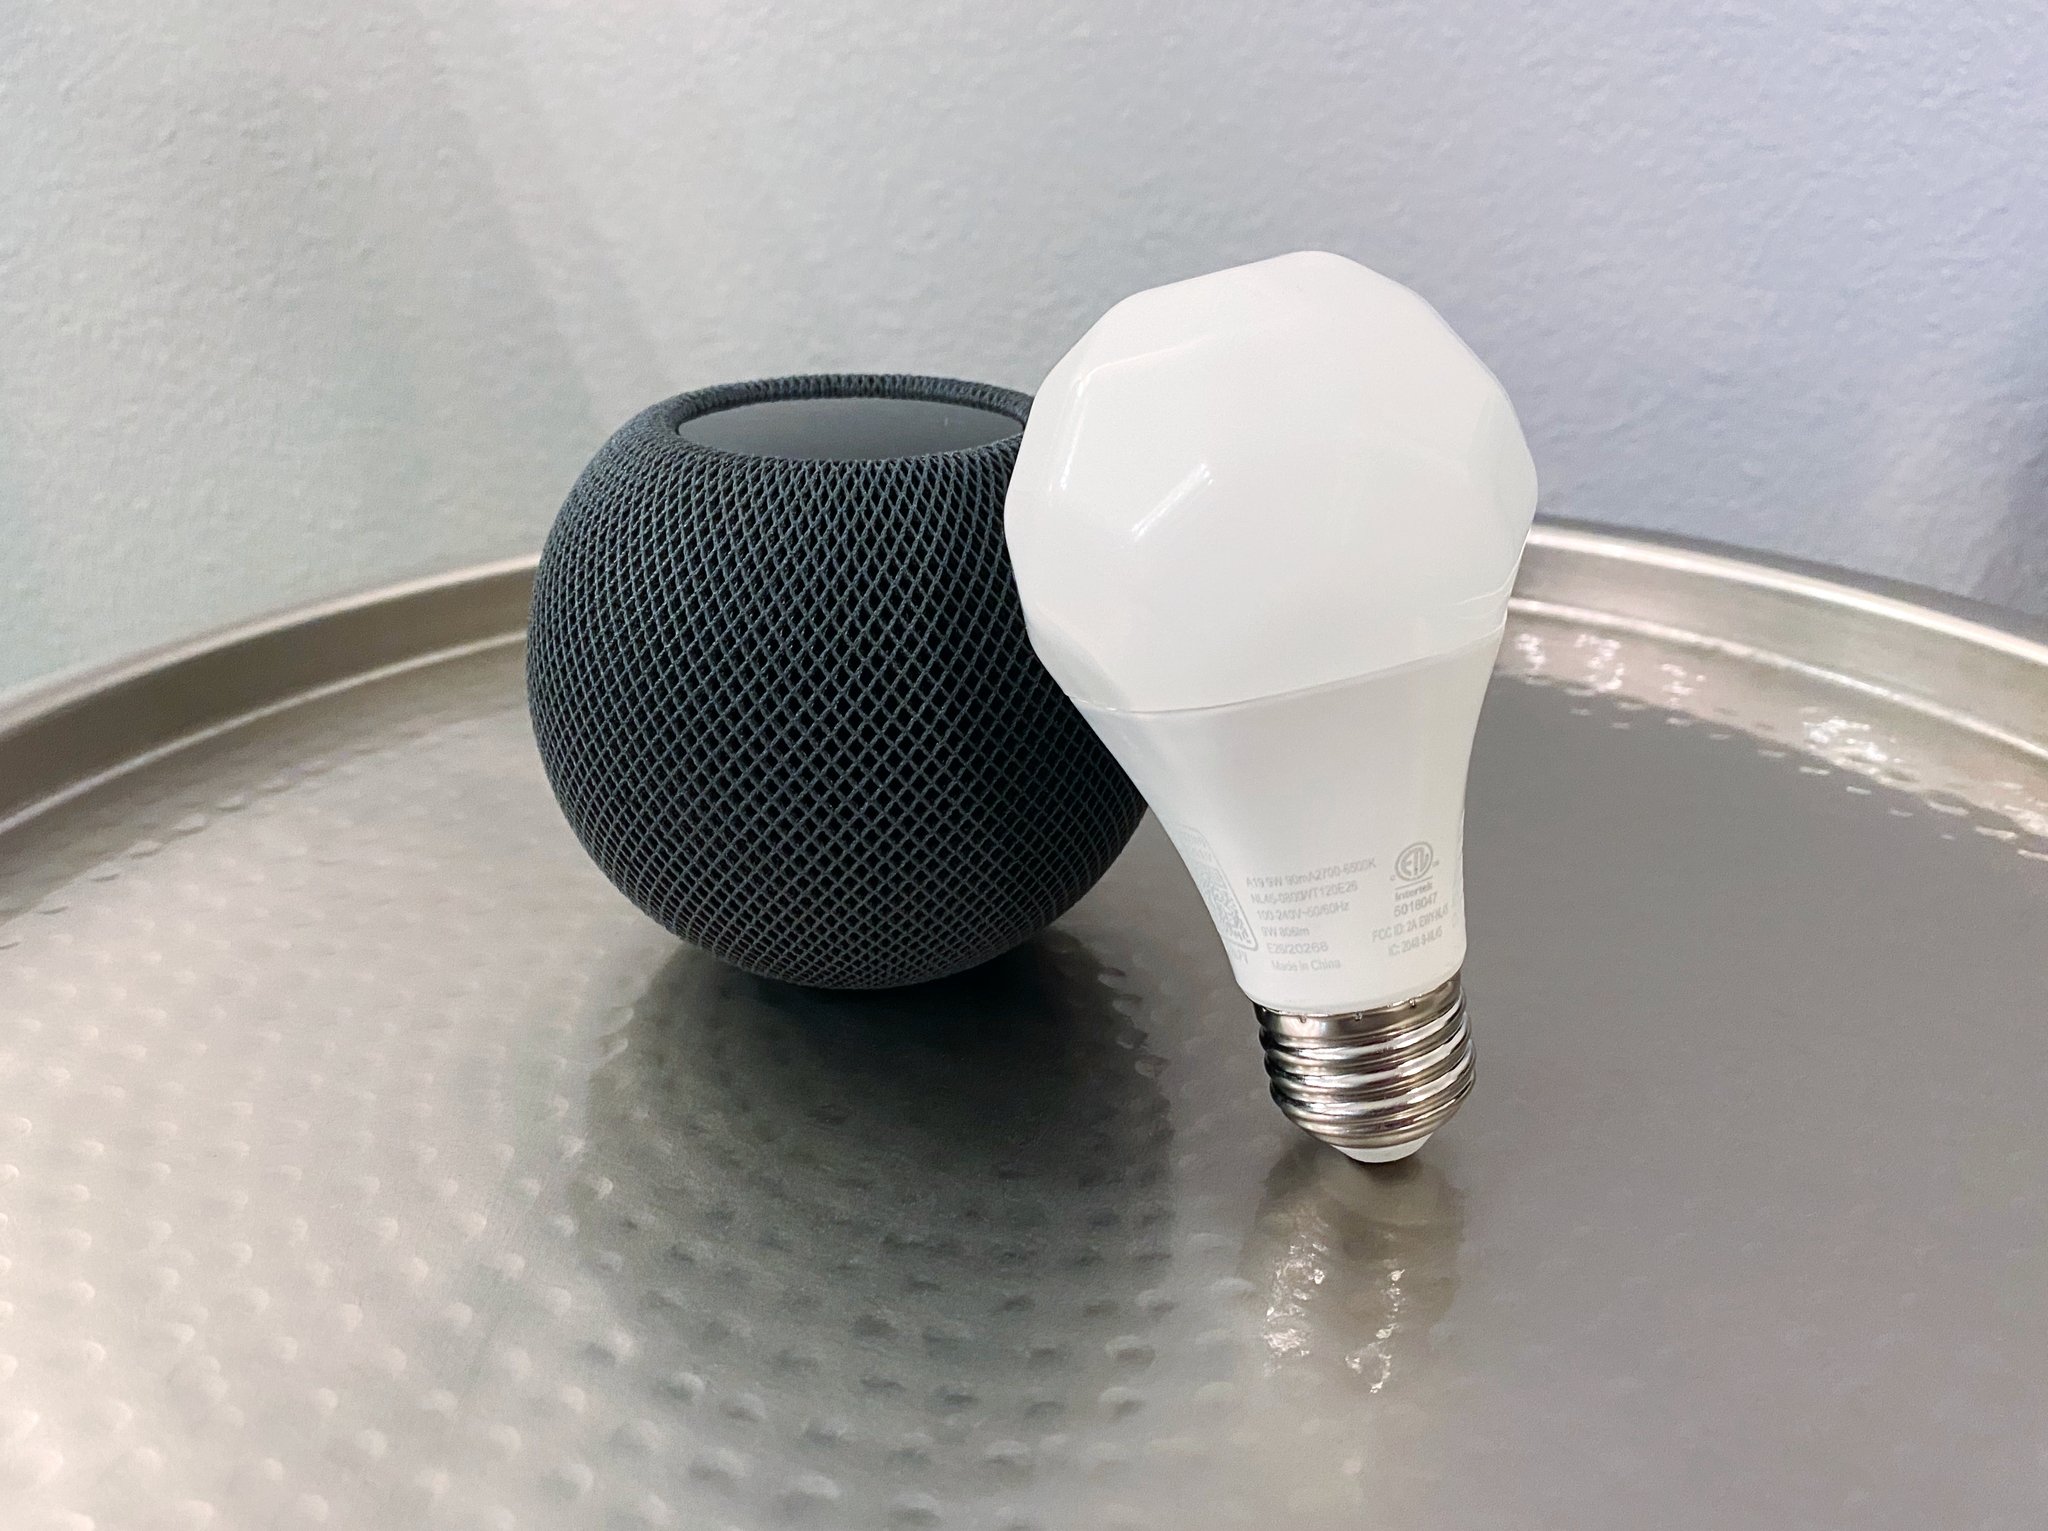 Nanoleaf Esssentials A19 Light Bulb leaning on a Space Gray HomePod mini